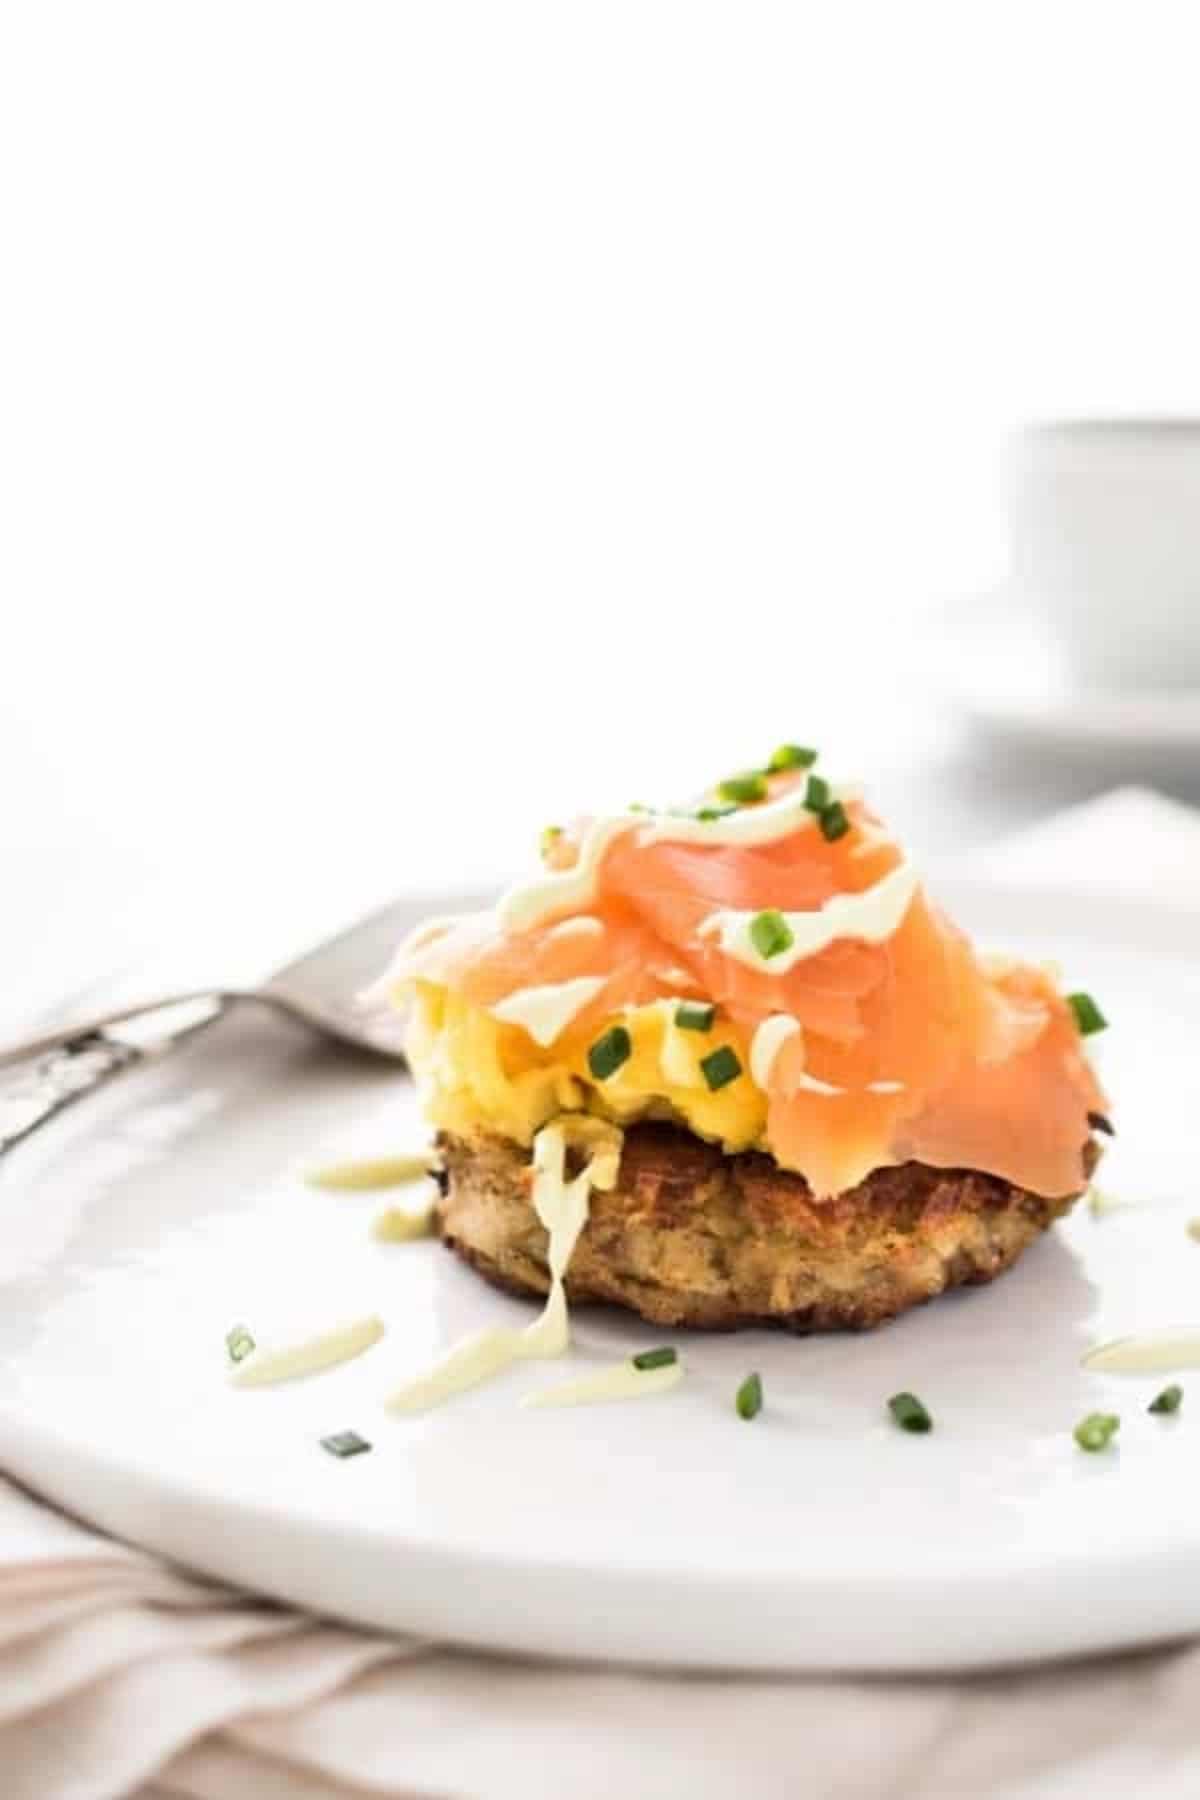 Irish Smoked Salmon and Egg Boxty served on a white plate.